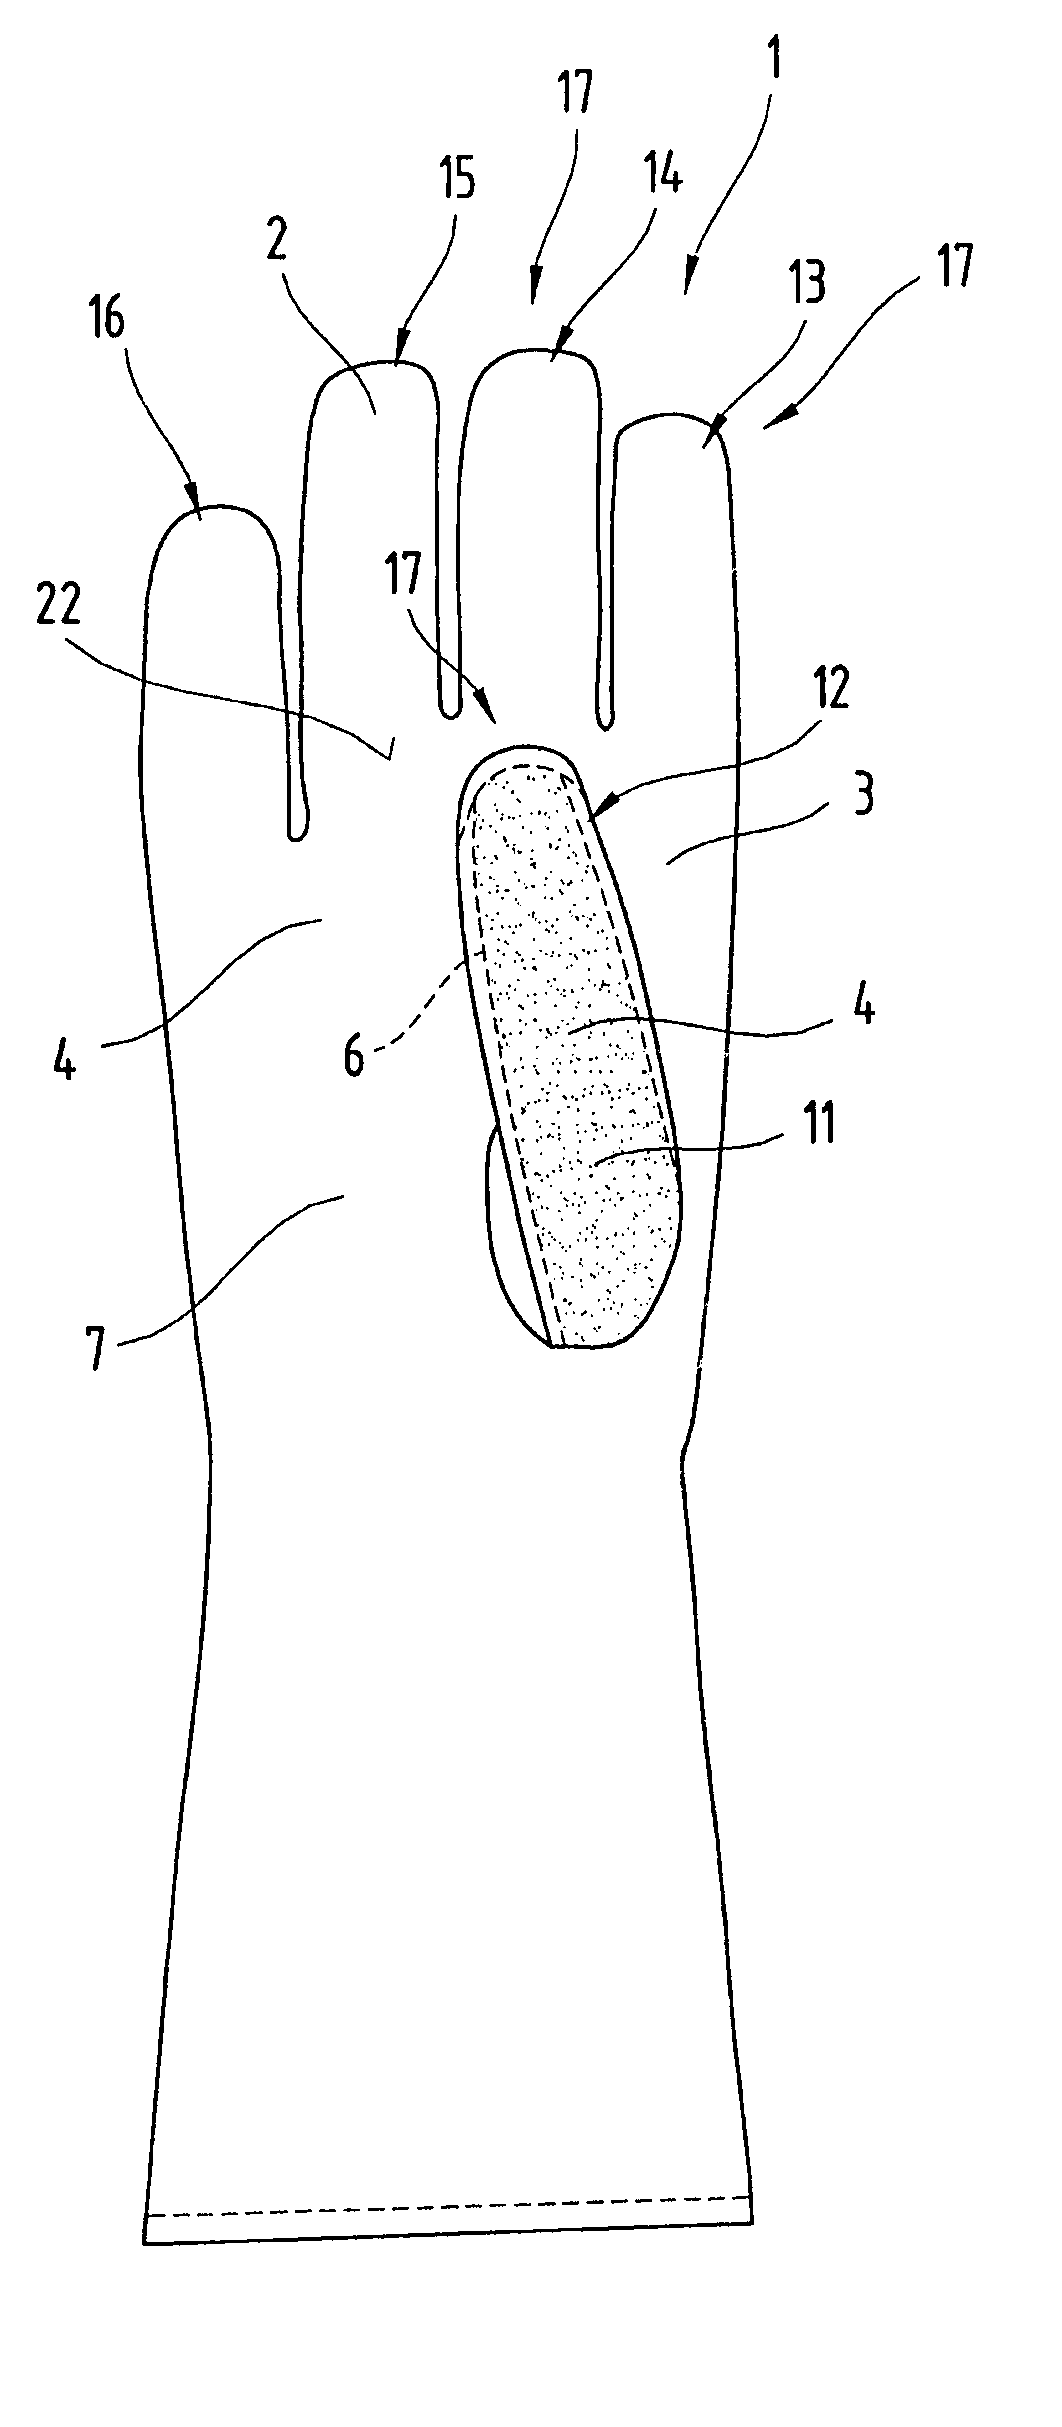 Glove and lining for a piece of equipment